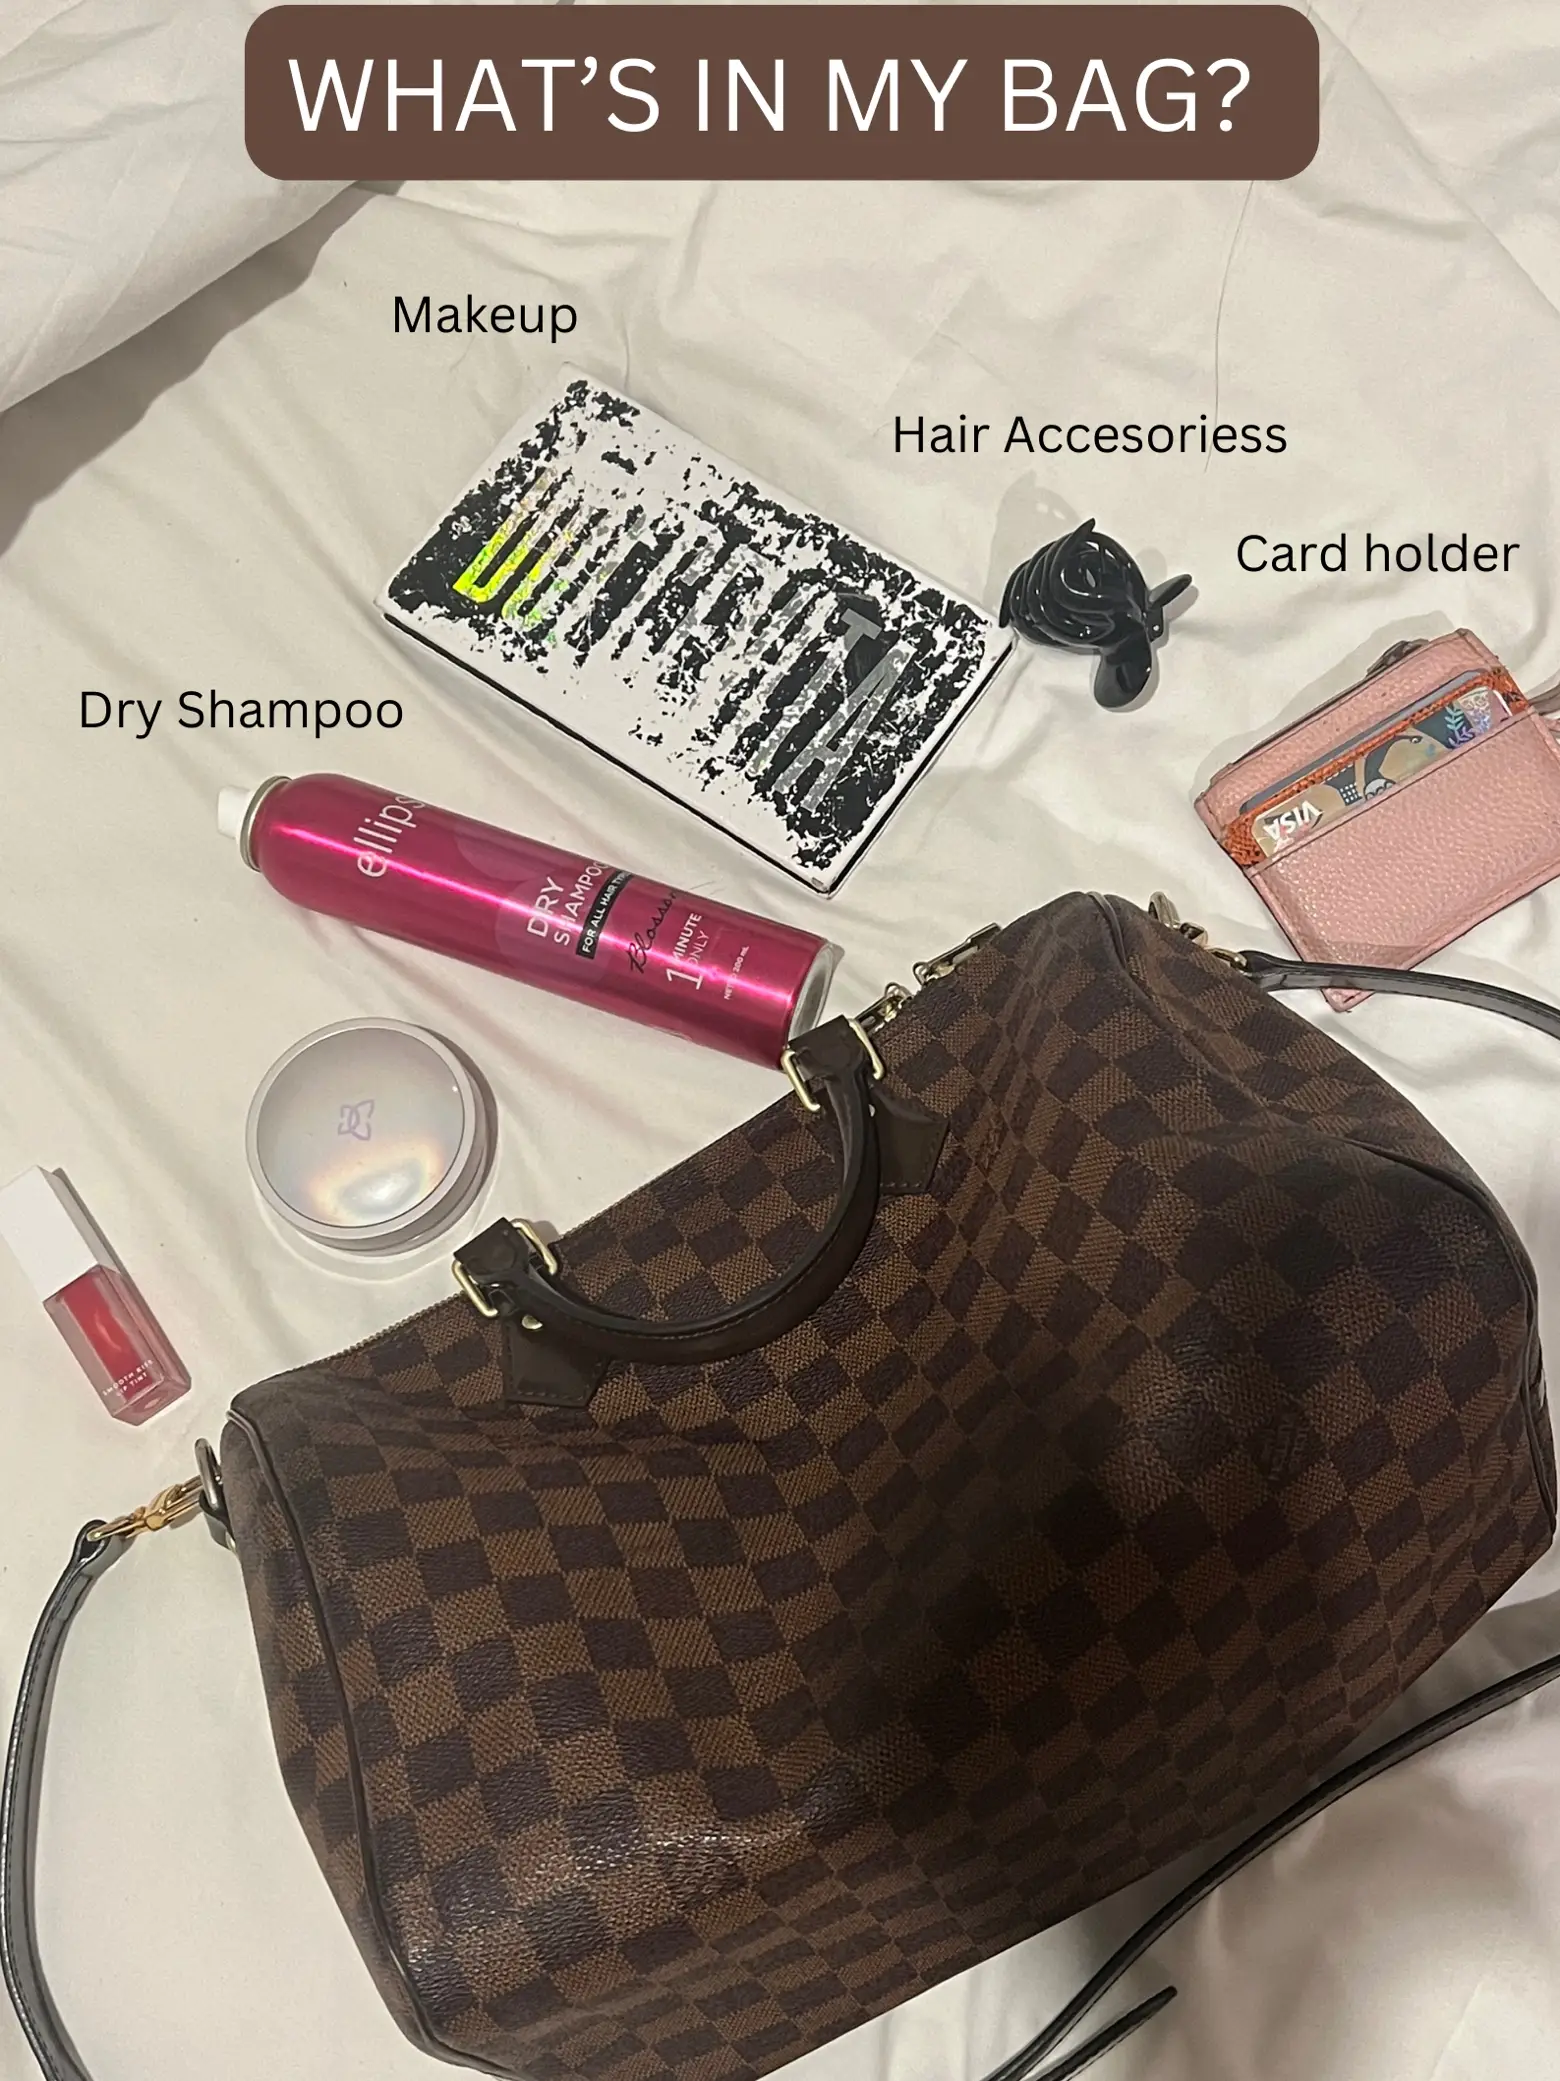 REVIEWING MY FAVORITE SLG: LOUIS VUITTON KEY POUCH, Gallery posted by  michelleorgeta